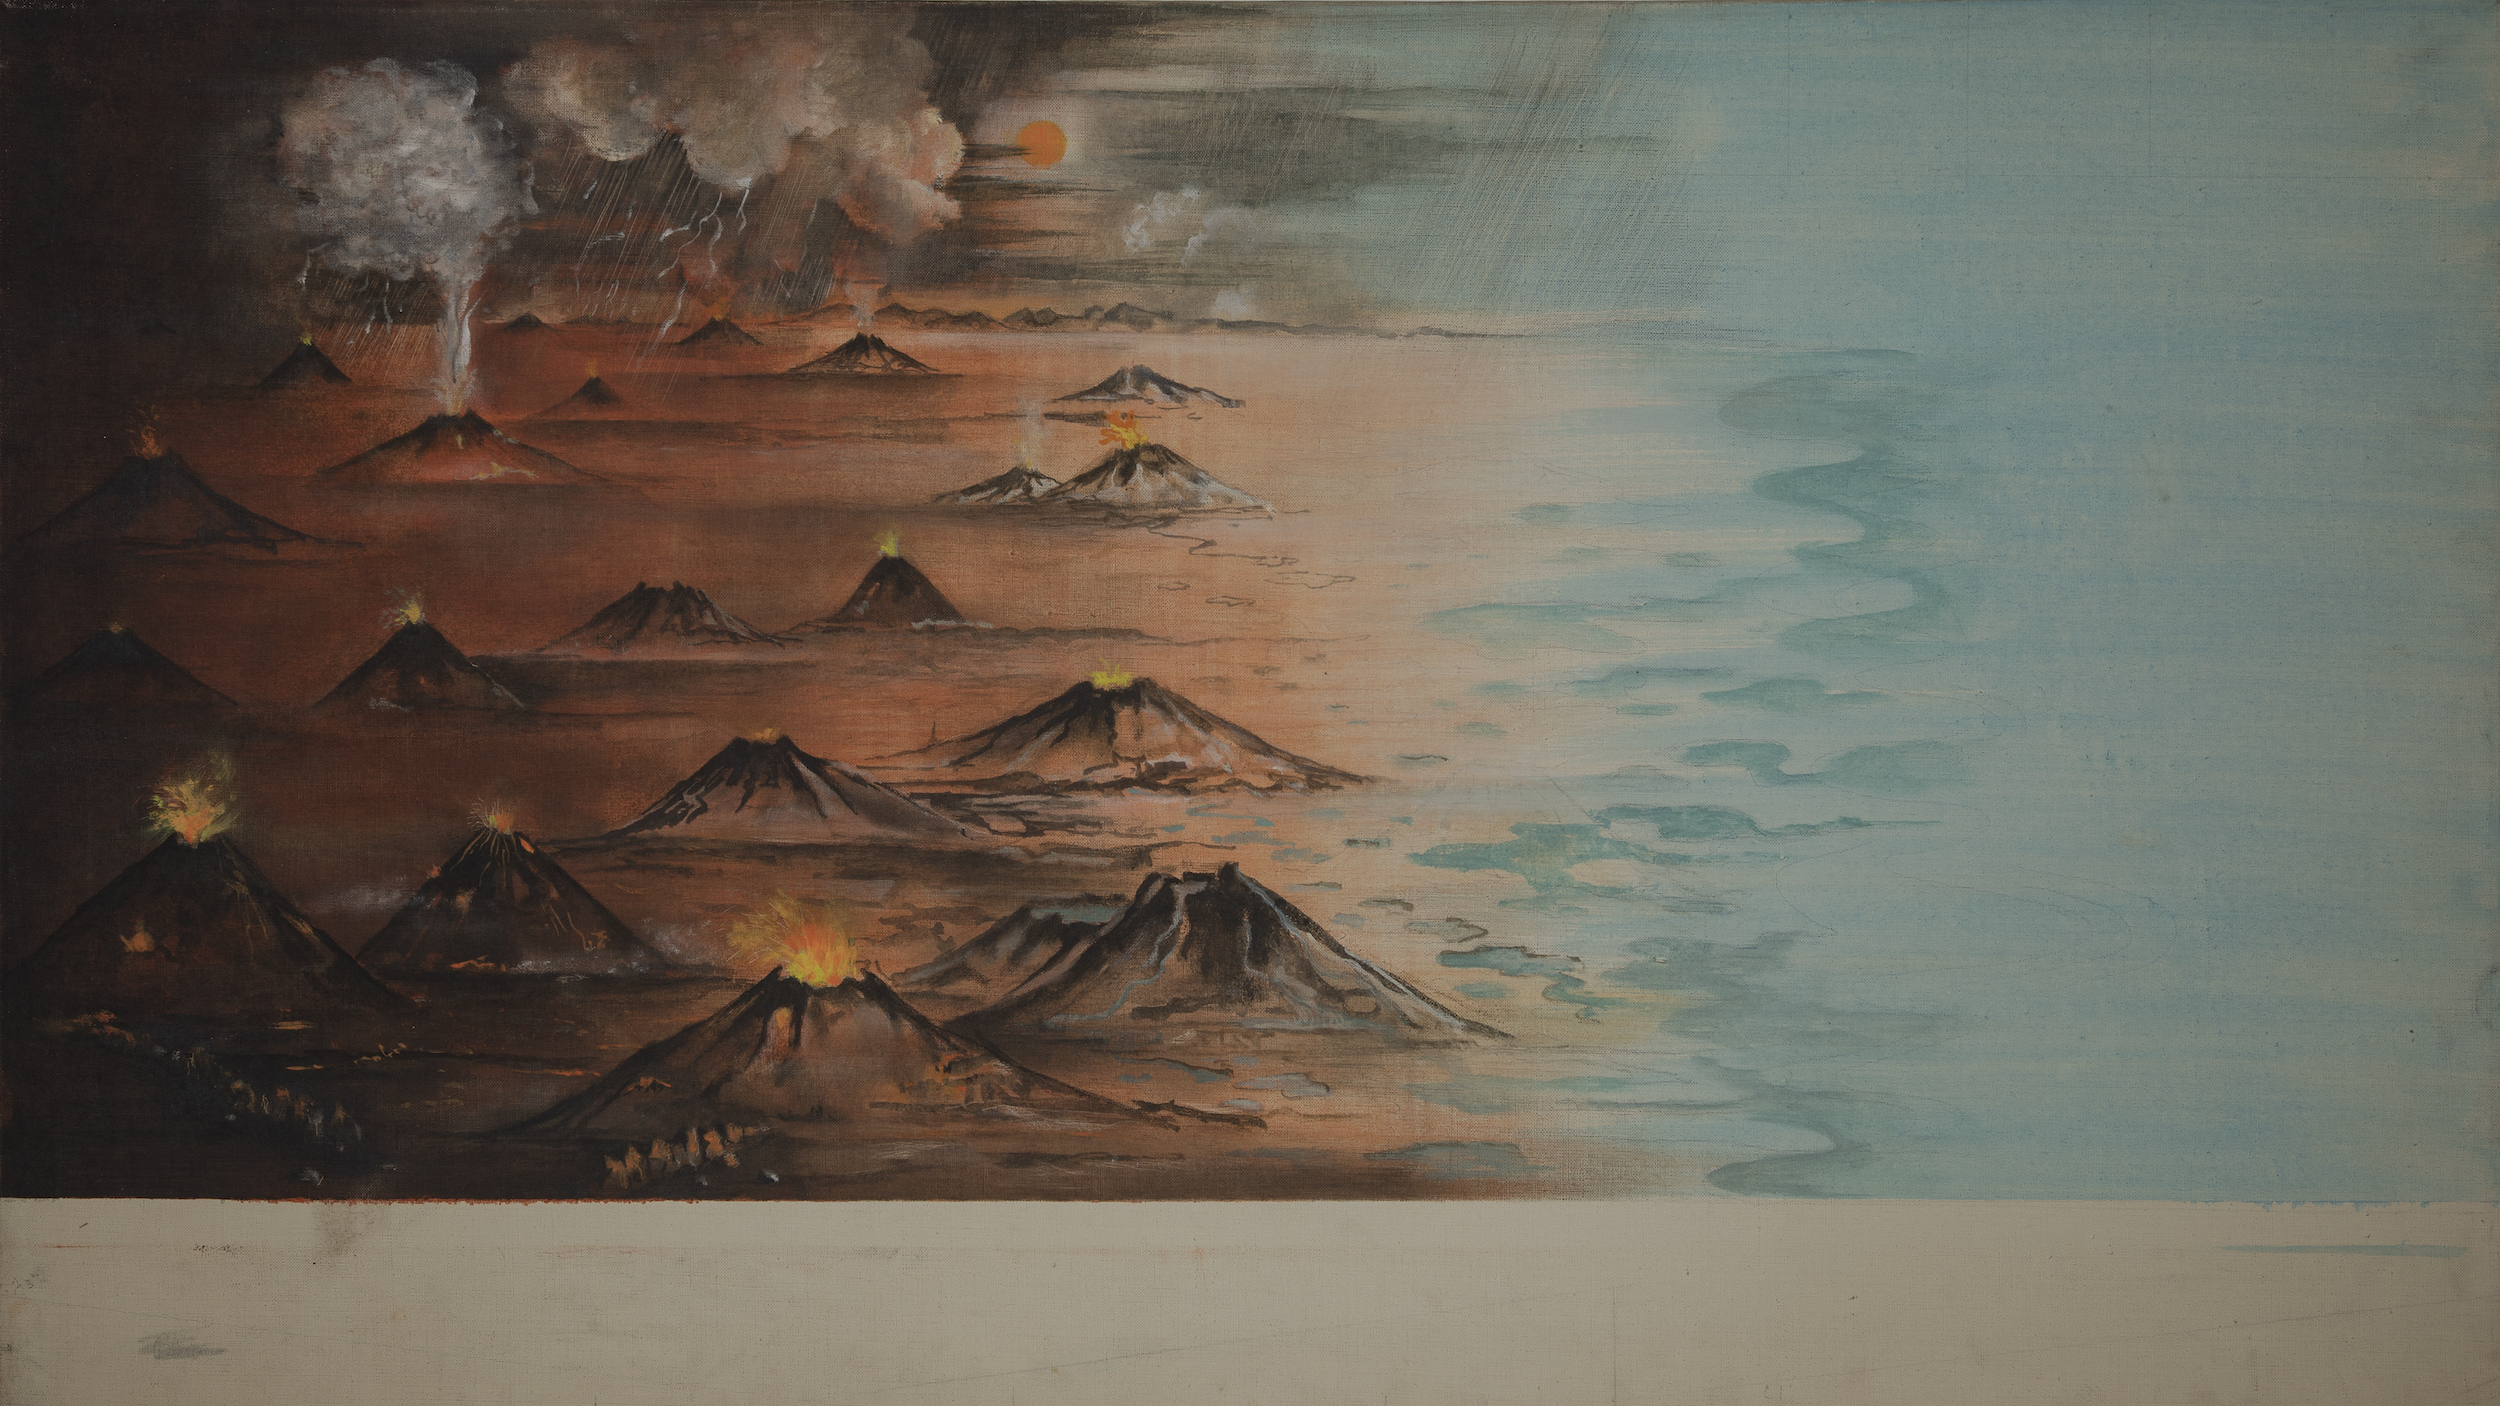 An oil study of Charles Alston's Origin of Life Mural, which depicts a field of volcanos next to a body of water.